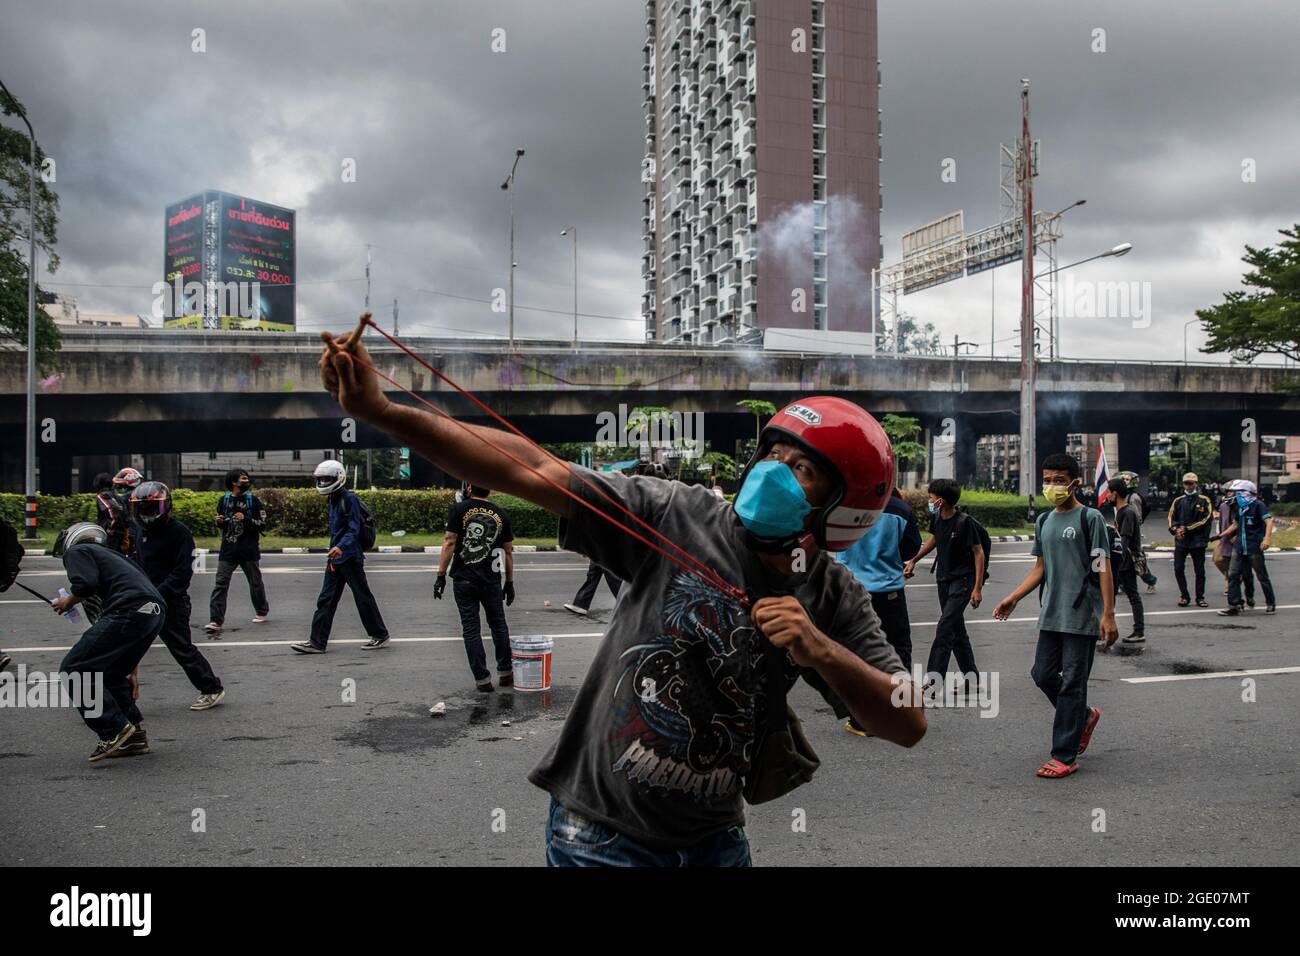 Bangkok, Thailand. 15th Aug, 2021. A pro-democracy protestor shoots a slingshot during clashes with police in Bangkok, Thailand on August 15, 2021. A city-wide motorbike rally, made up primarily of Red Shirts and headed by former lawmaker, Nattawut Saikuar, rode through Bangkok peacefully, urging protestors not to become violent. However, some protestors, mostly youth groups like REDEM, tried once again to reach the residence of Thai Prime Minister, Prayuth Chan-Ocha, that inevitably ended in clashes with law enforcement. Credit: ZUMA Press, Inc./Alamy Live News Stock Photo